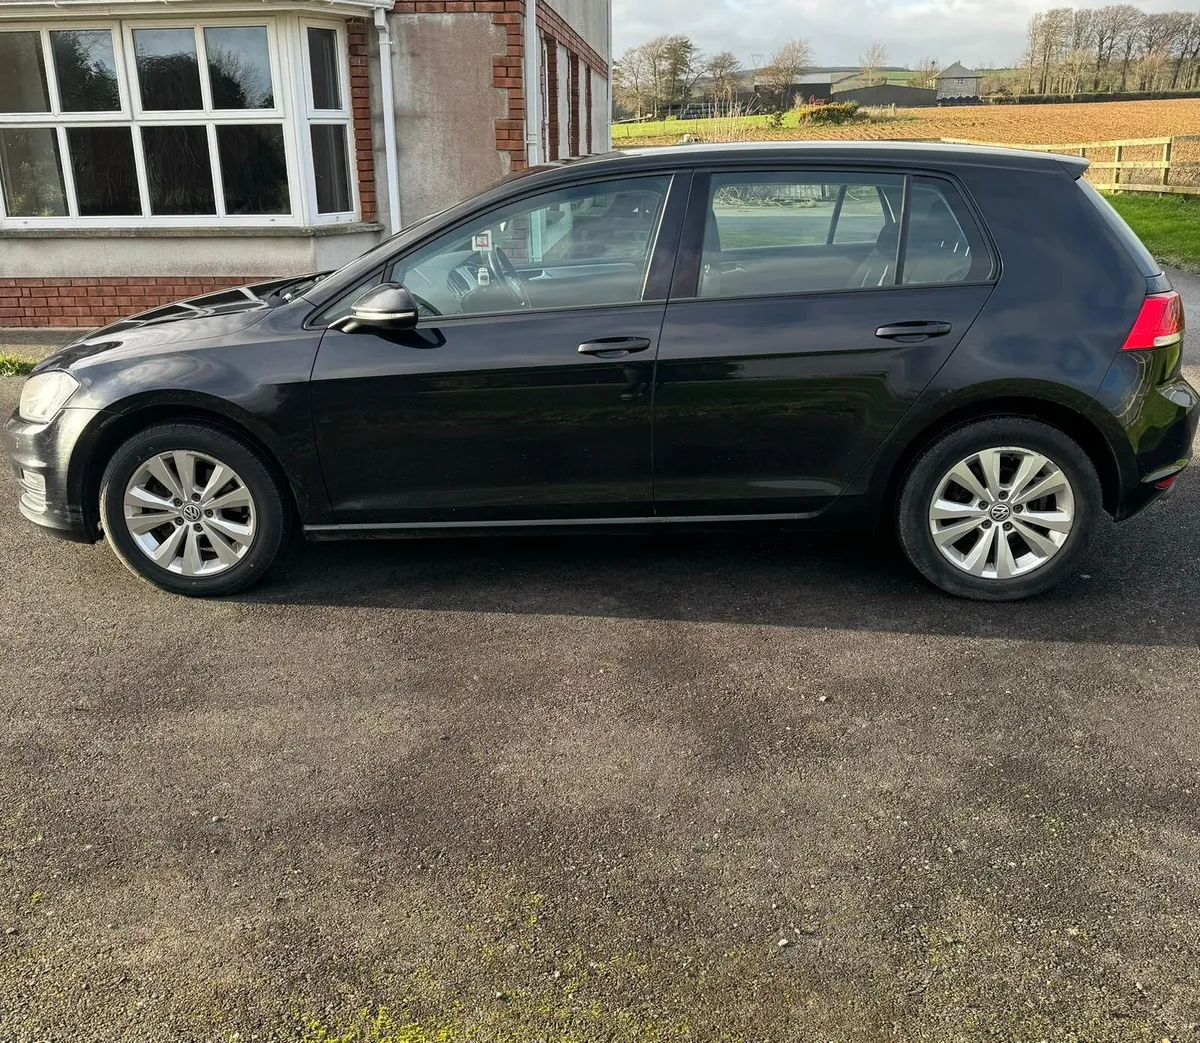 Golf 1.6 diesel immaculate condition test 05-25